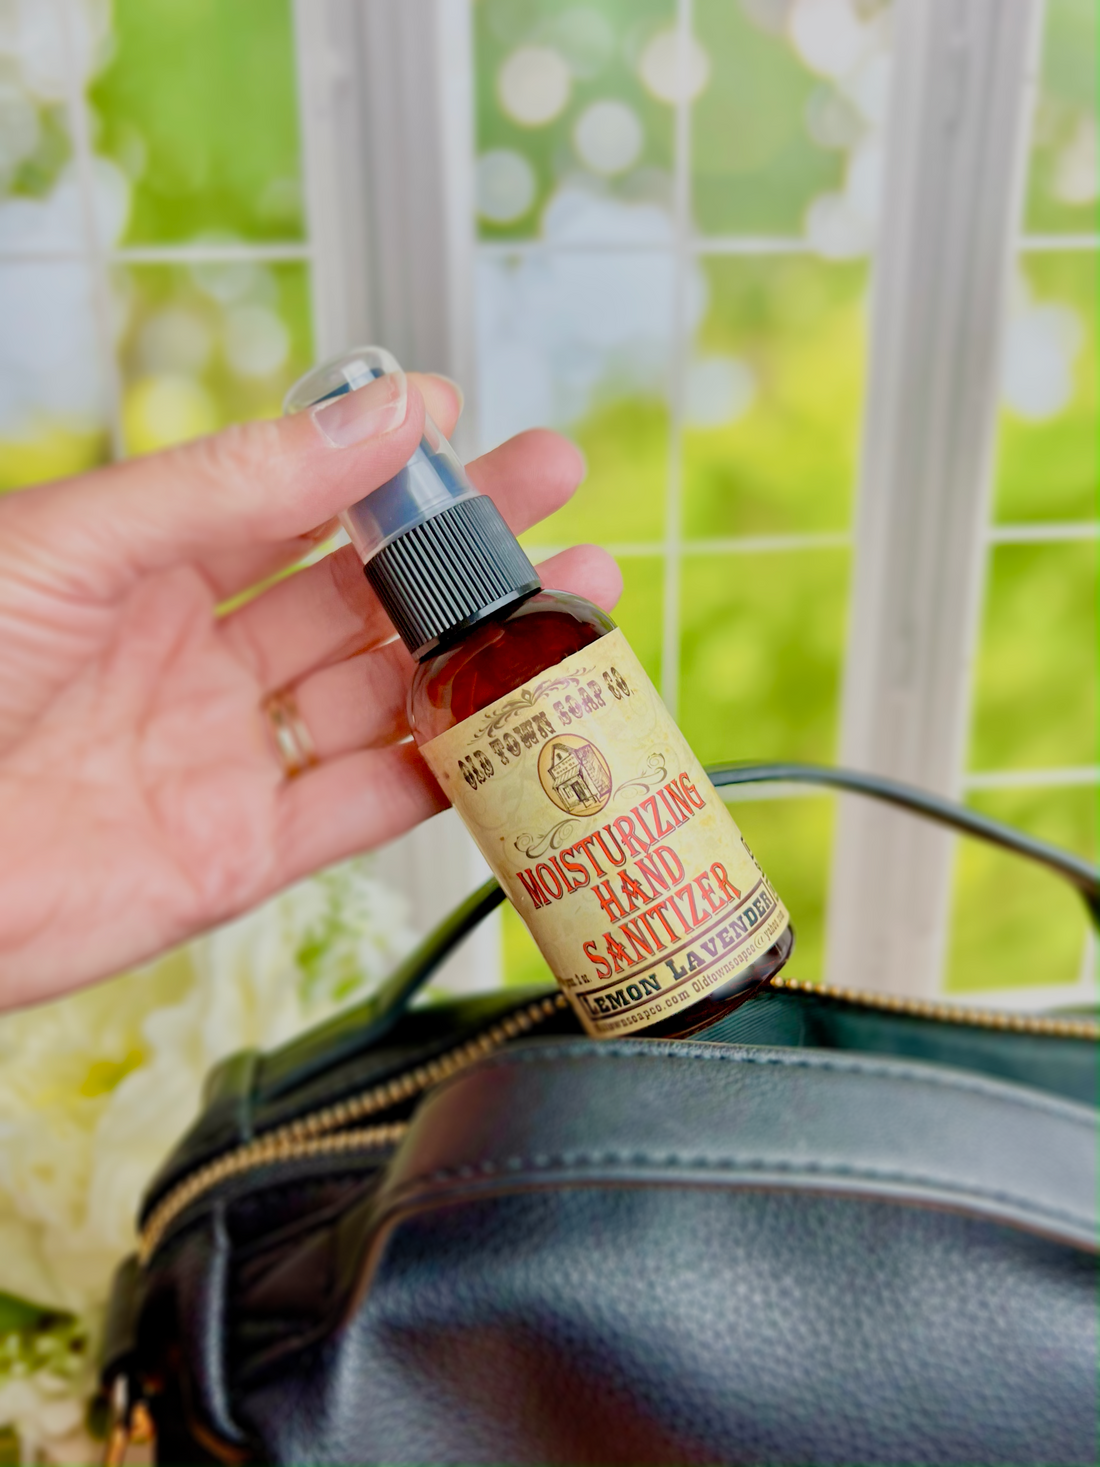 Travel Size Hand Sanitizer - Old Town Soap Co.